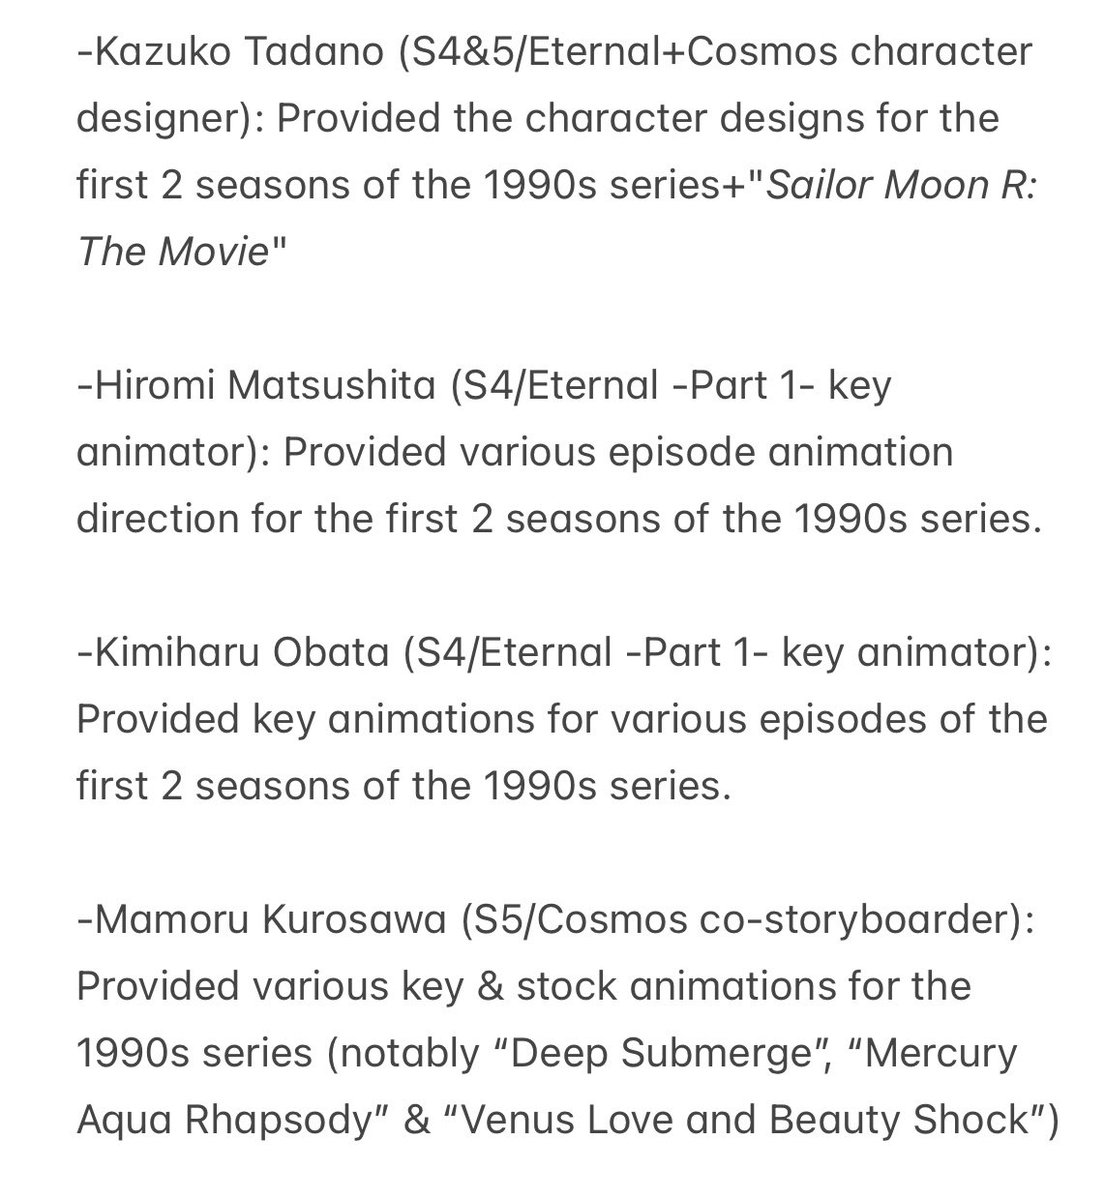 Lists of ppl from 'Crystal' series that also worked on the 1990s anime series (Triple checked the ending credit lists):